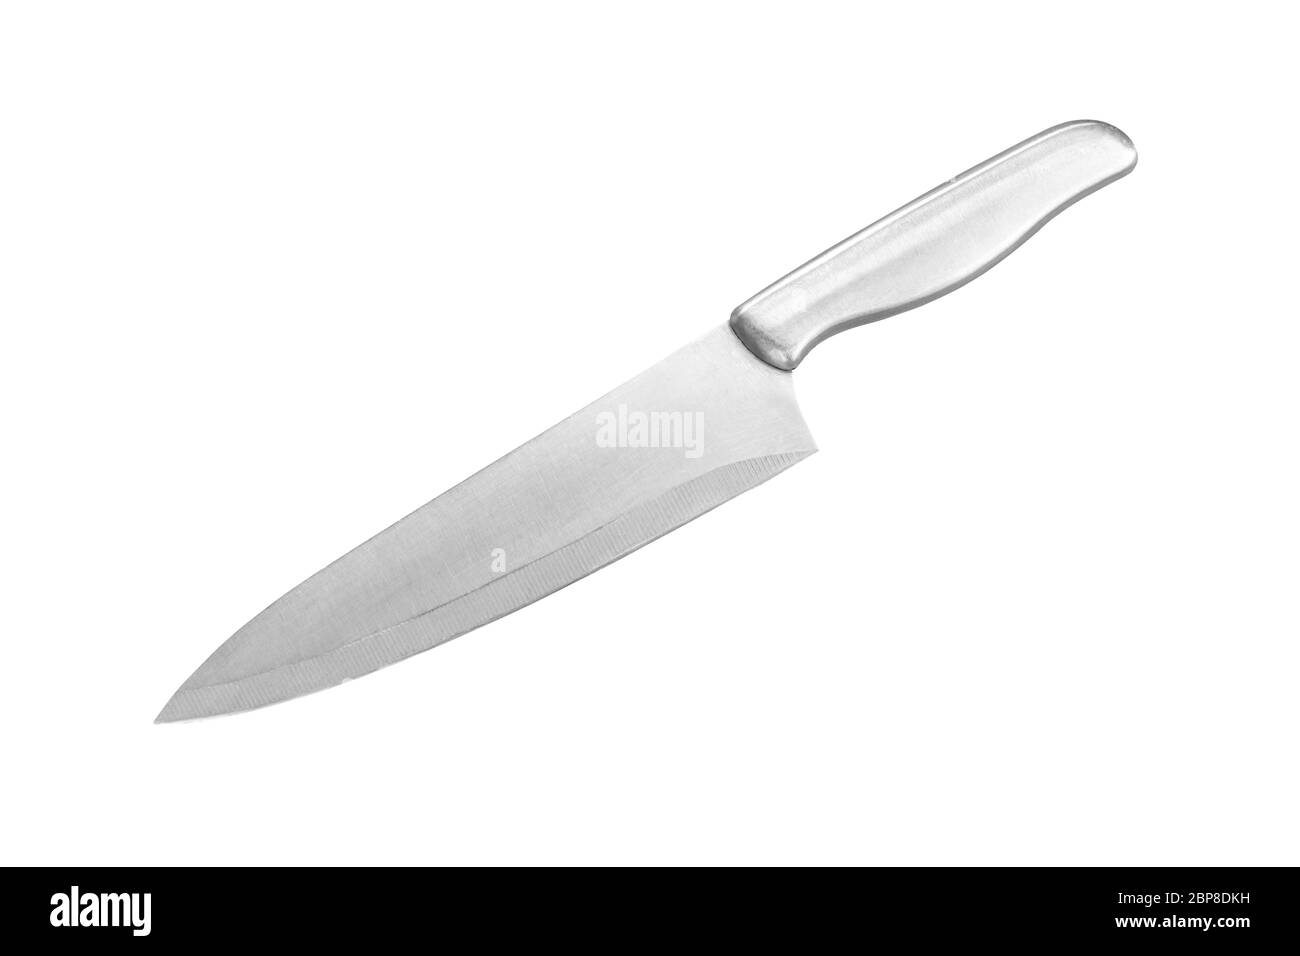 kitchen stainless knife isolated on white background with clipping path. Stock Photo